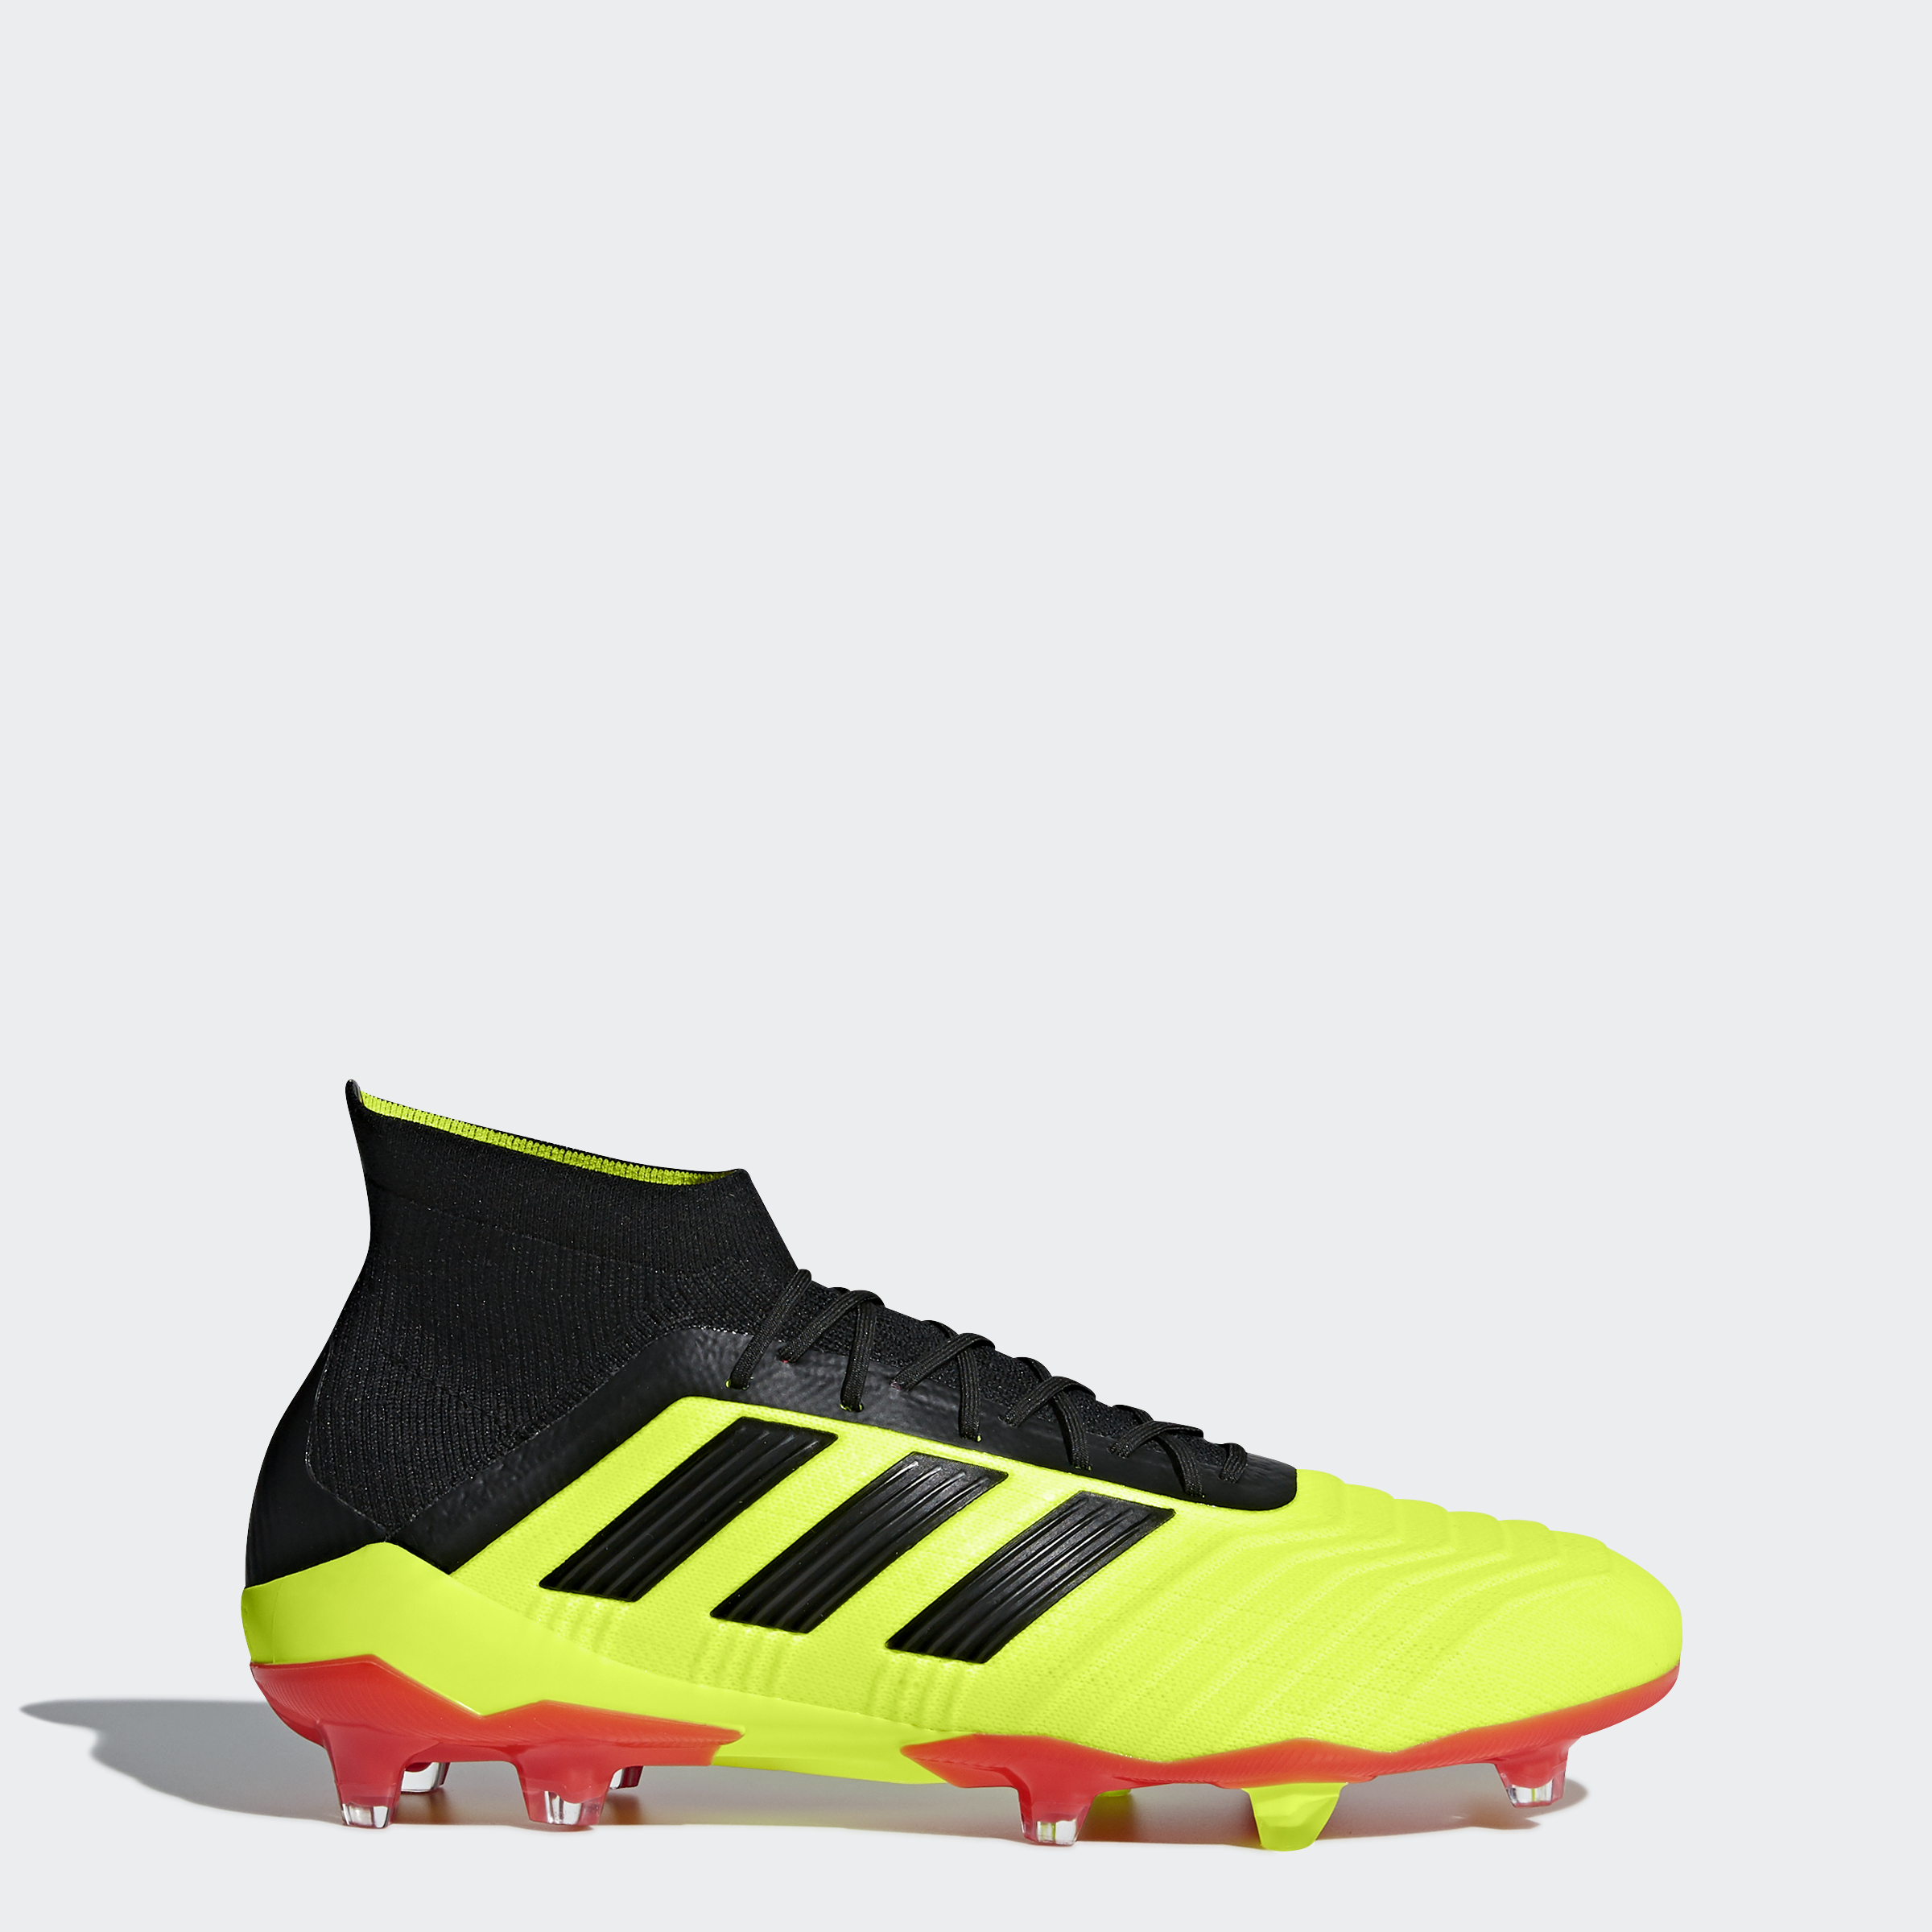 adidas football shoes under 3000